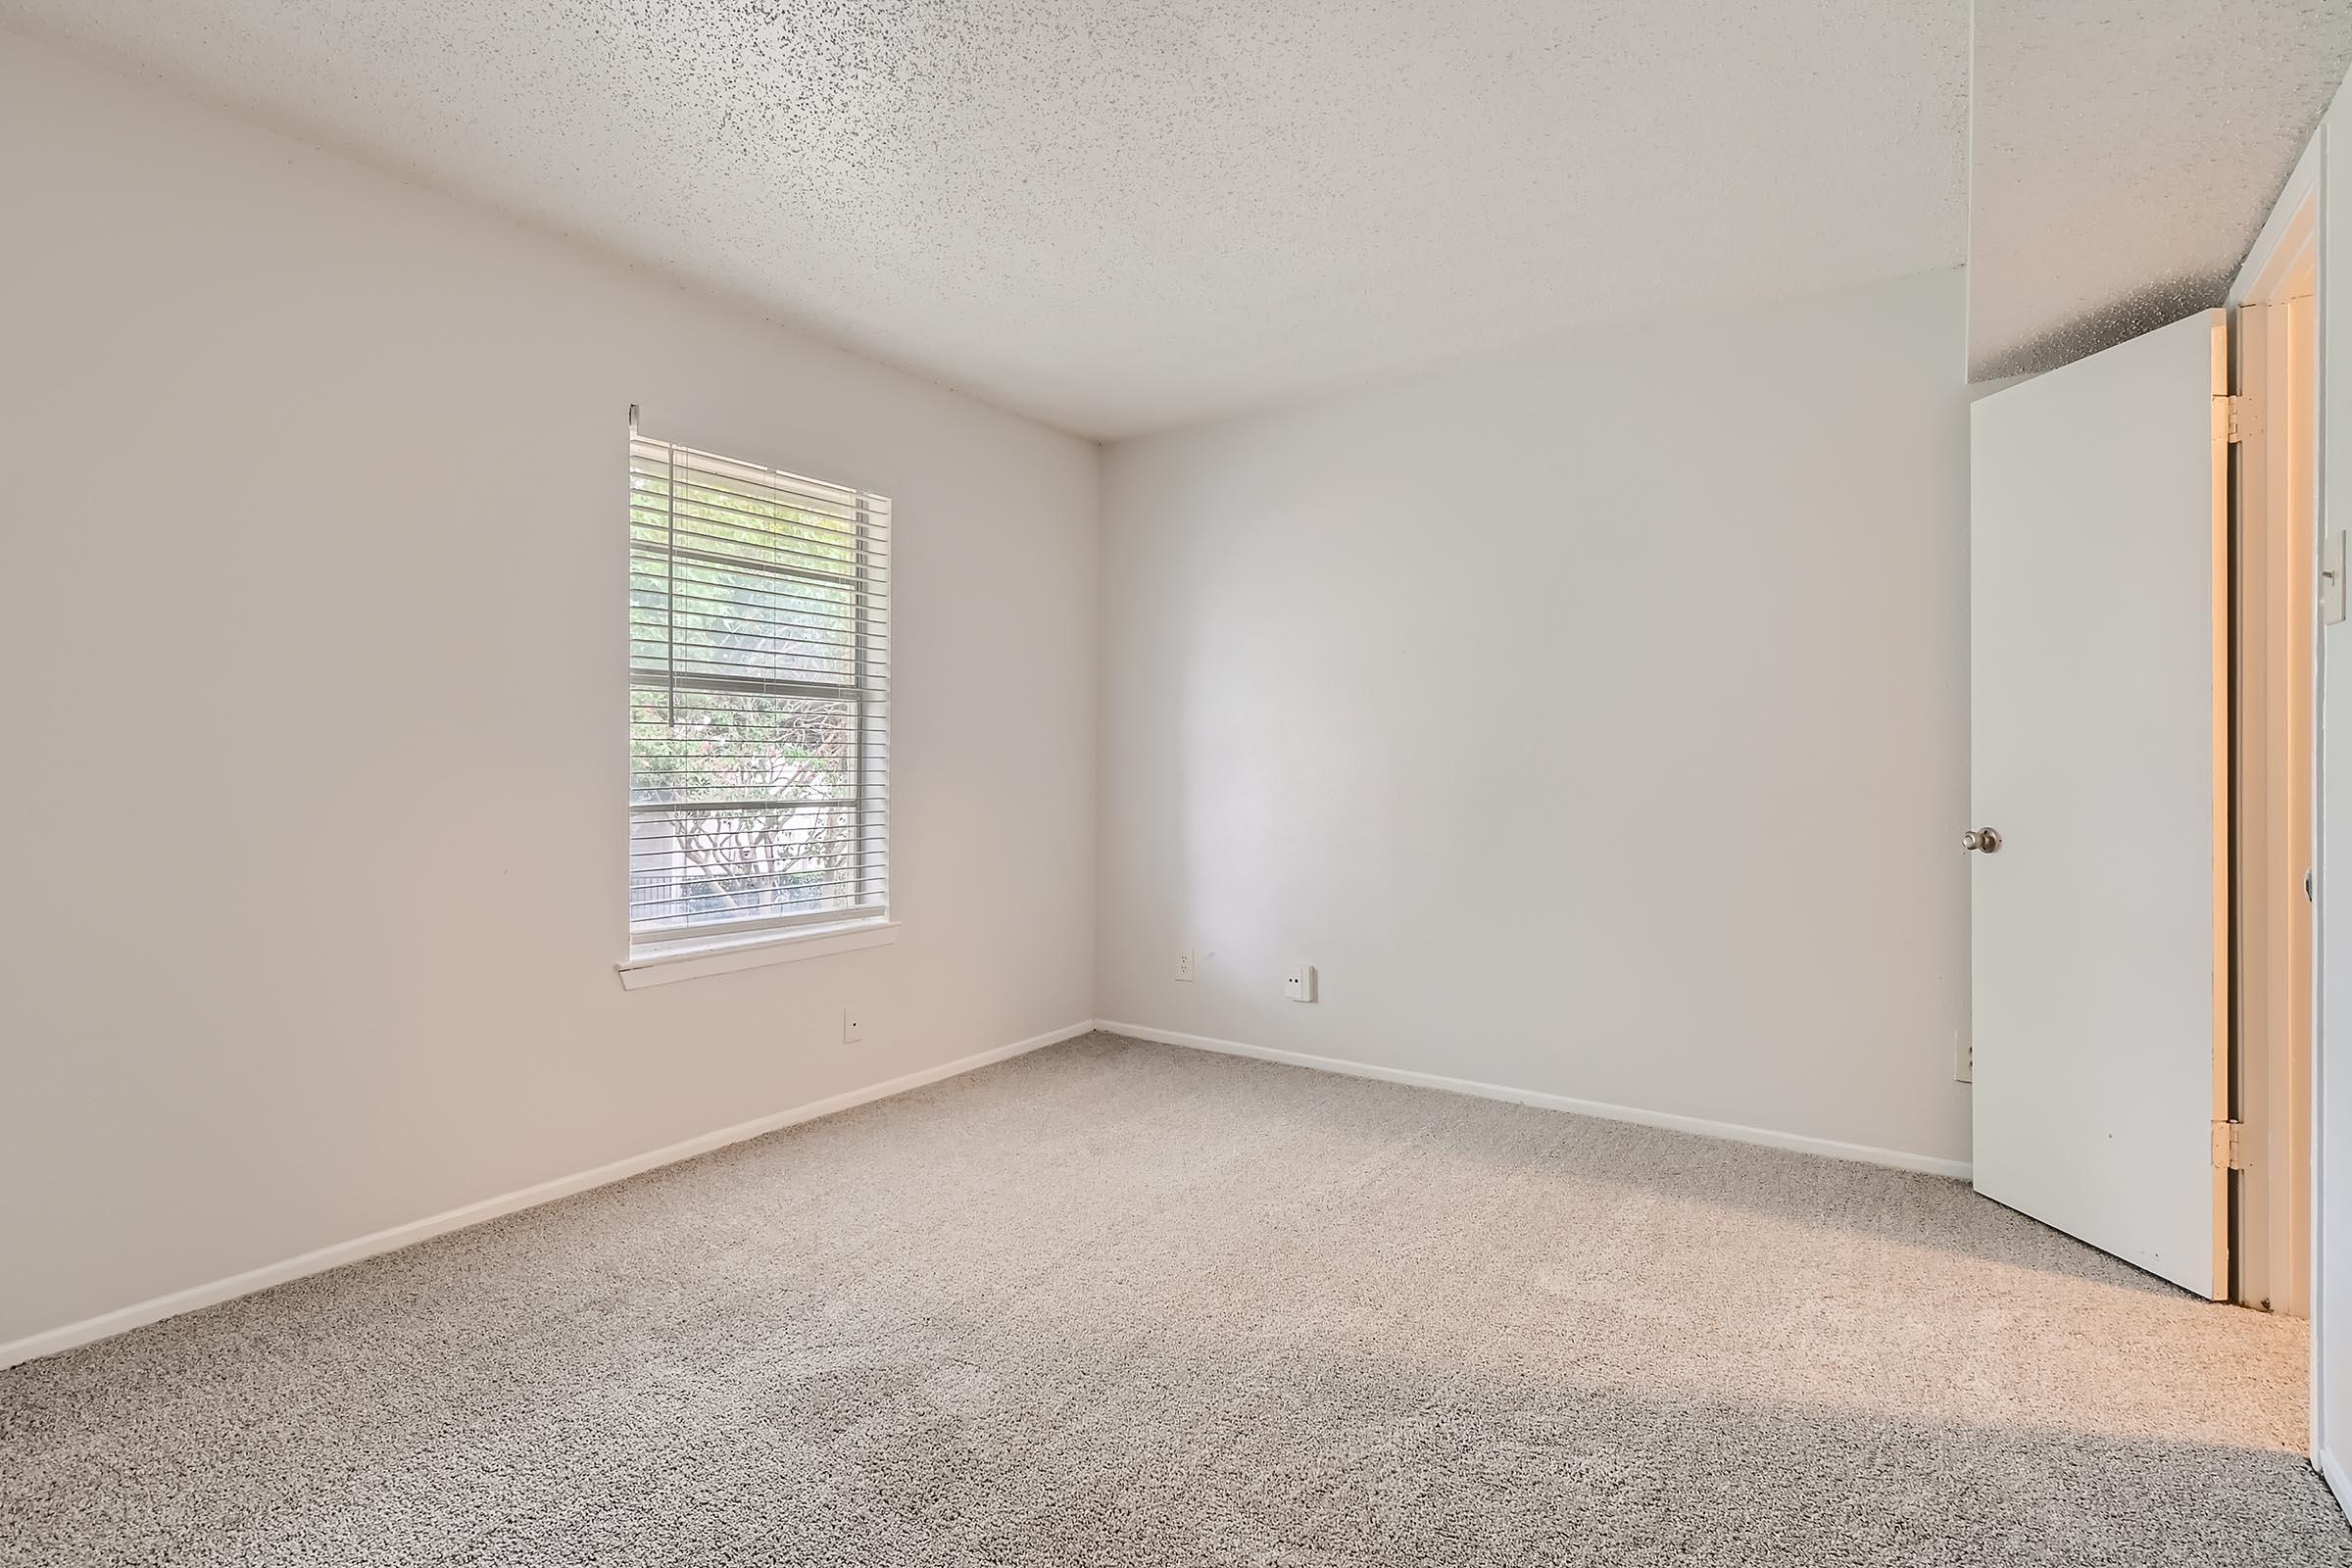 A Rise North Arlington carpeted apartment bedroom with a window.